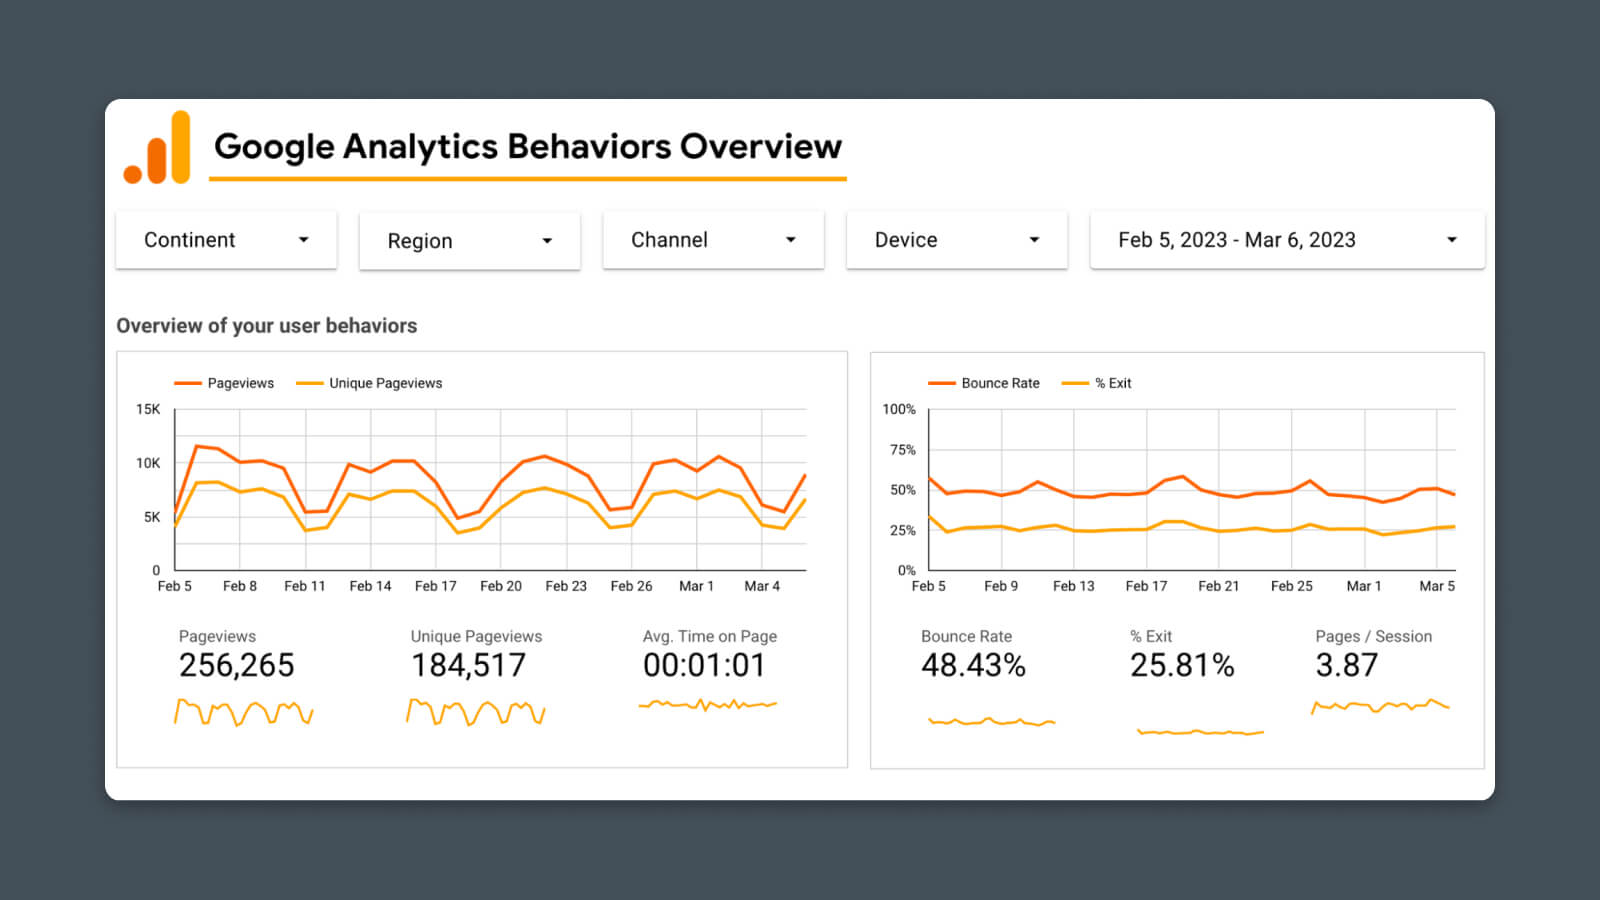 User Experience dashboard. Here you can assess the functionality of your website by building a dashboard for crucial UX metrics like "Session duration" and "Bounce rate".